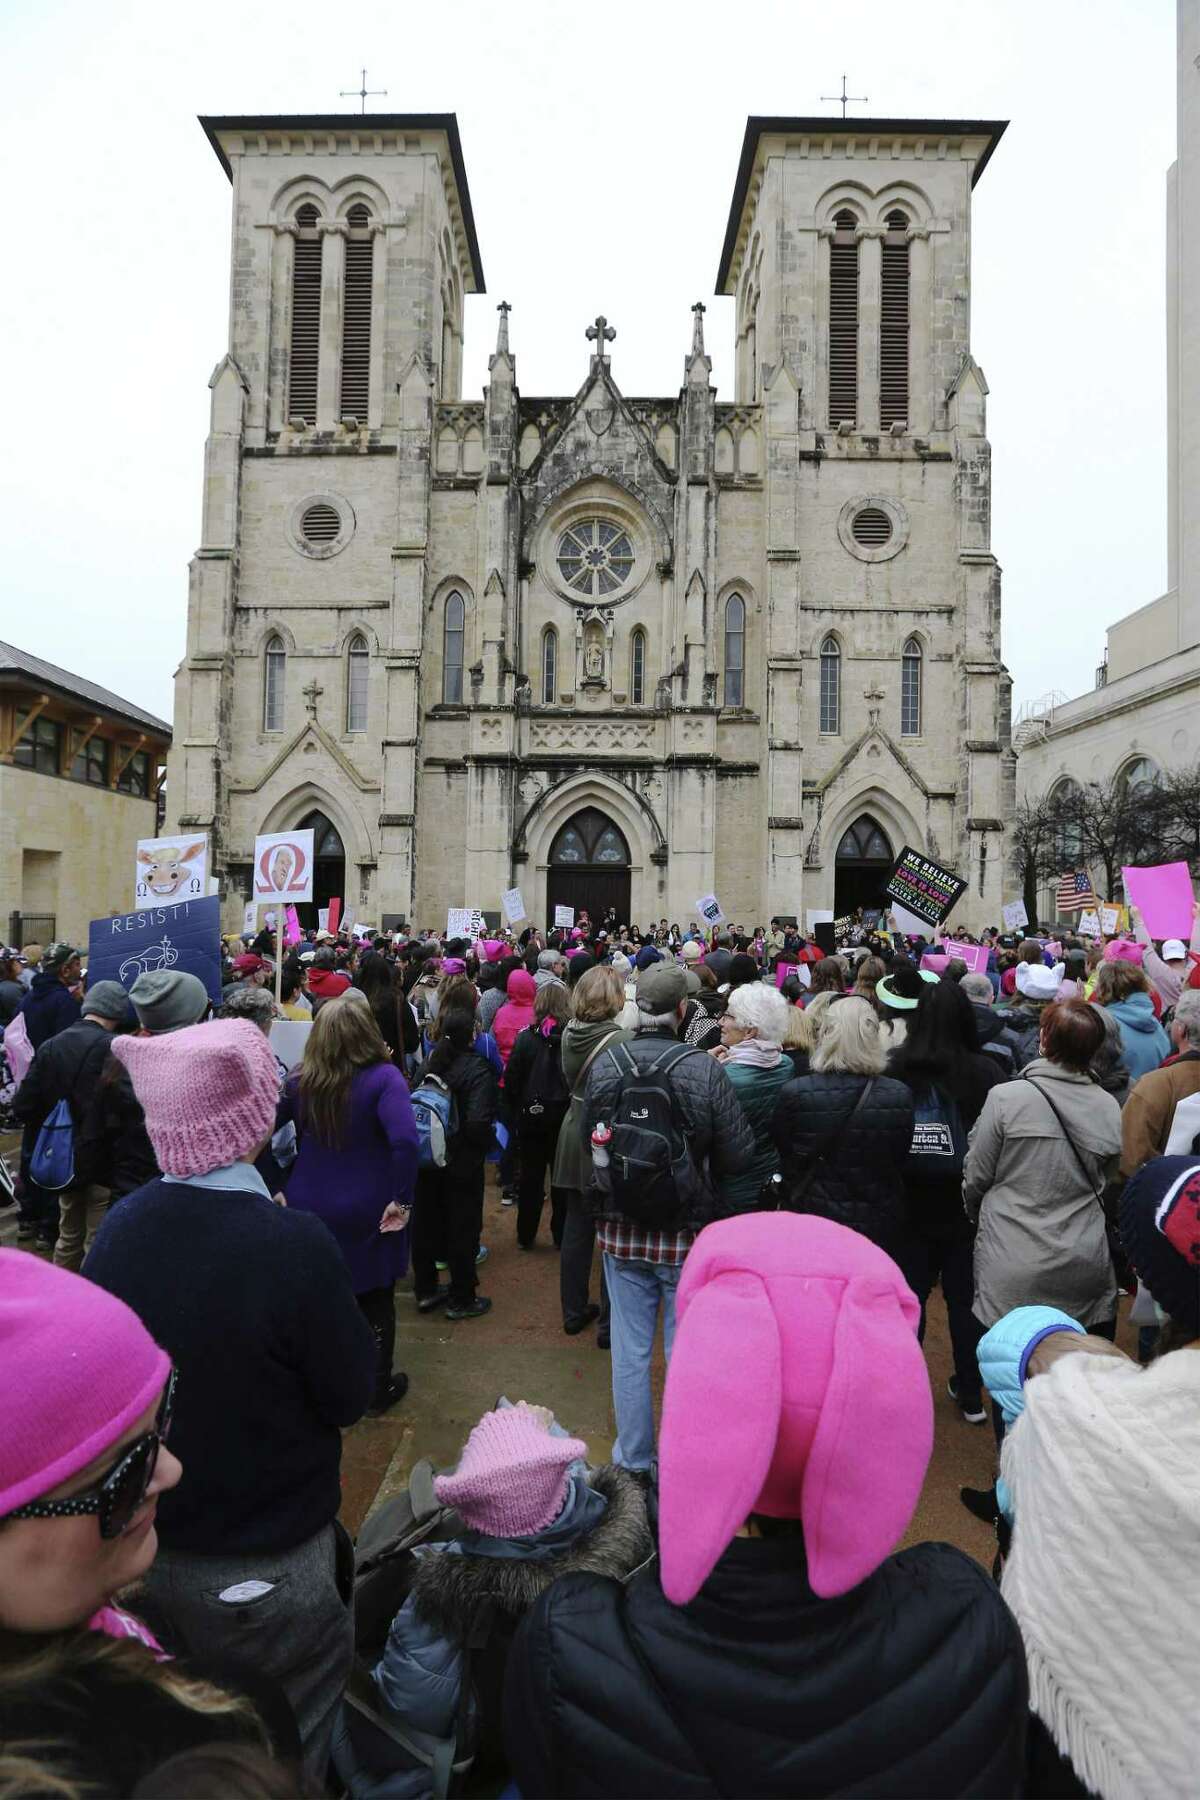 About 500 people according to organizers gathered at Main Plaza to take part in the second annual Women's Rally on Saturday, Jan. 20, 2018. The message of the event hosted by TX23 Indivisible, was clear and decisive as speaker after speaker implored those in attendance that women's voices were not be silenced and to vote in upcoming elections. "When women vote, we win," said Cassandra Littlejohn, Bexar County Democratic Party Political Director. Toward the end of the two-hour rally, a brief march around Main Plaza came together as the event concluded. (Kin Man Hui/San Antonio Express-News)